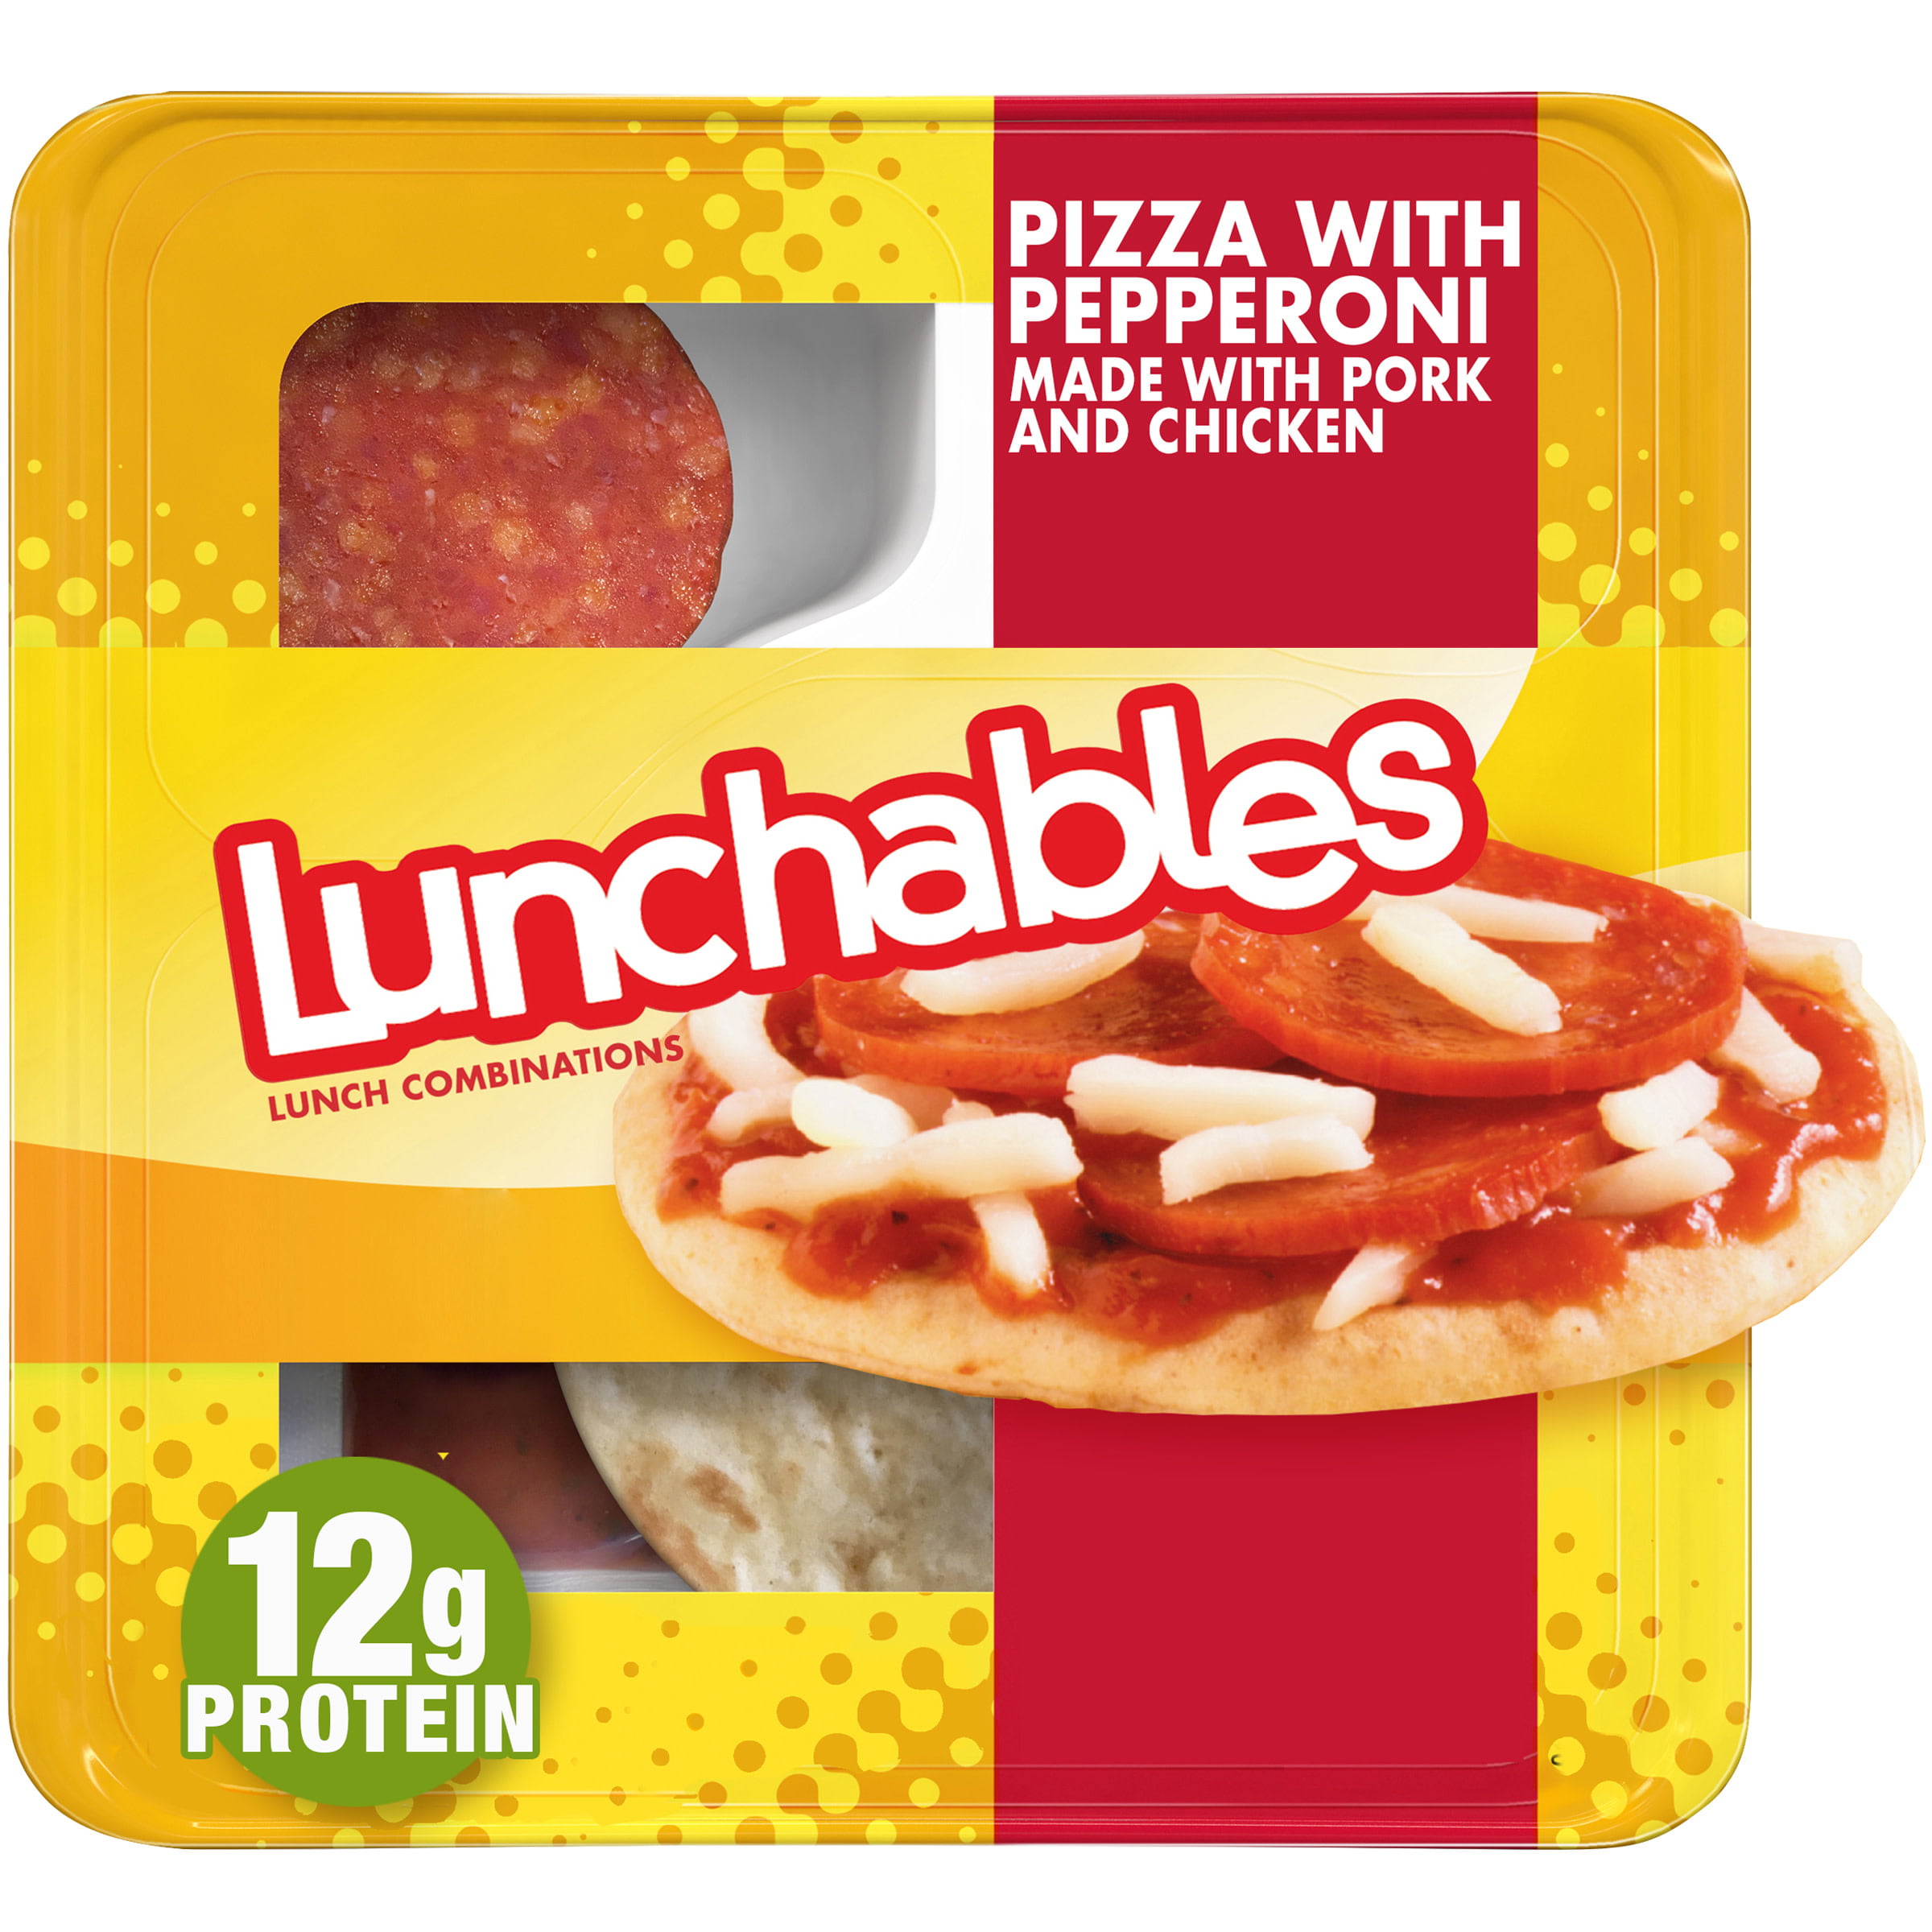 Lunchables Pizza With Pepperoni Lunch Combinations, 4.3 oz. Tray